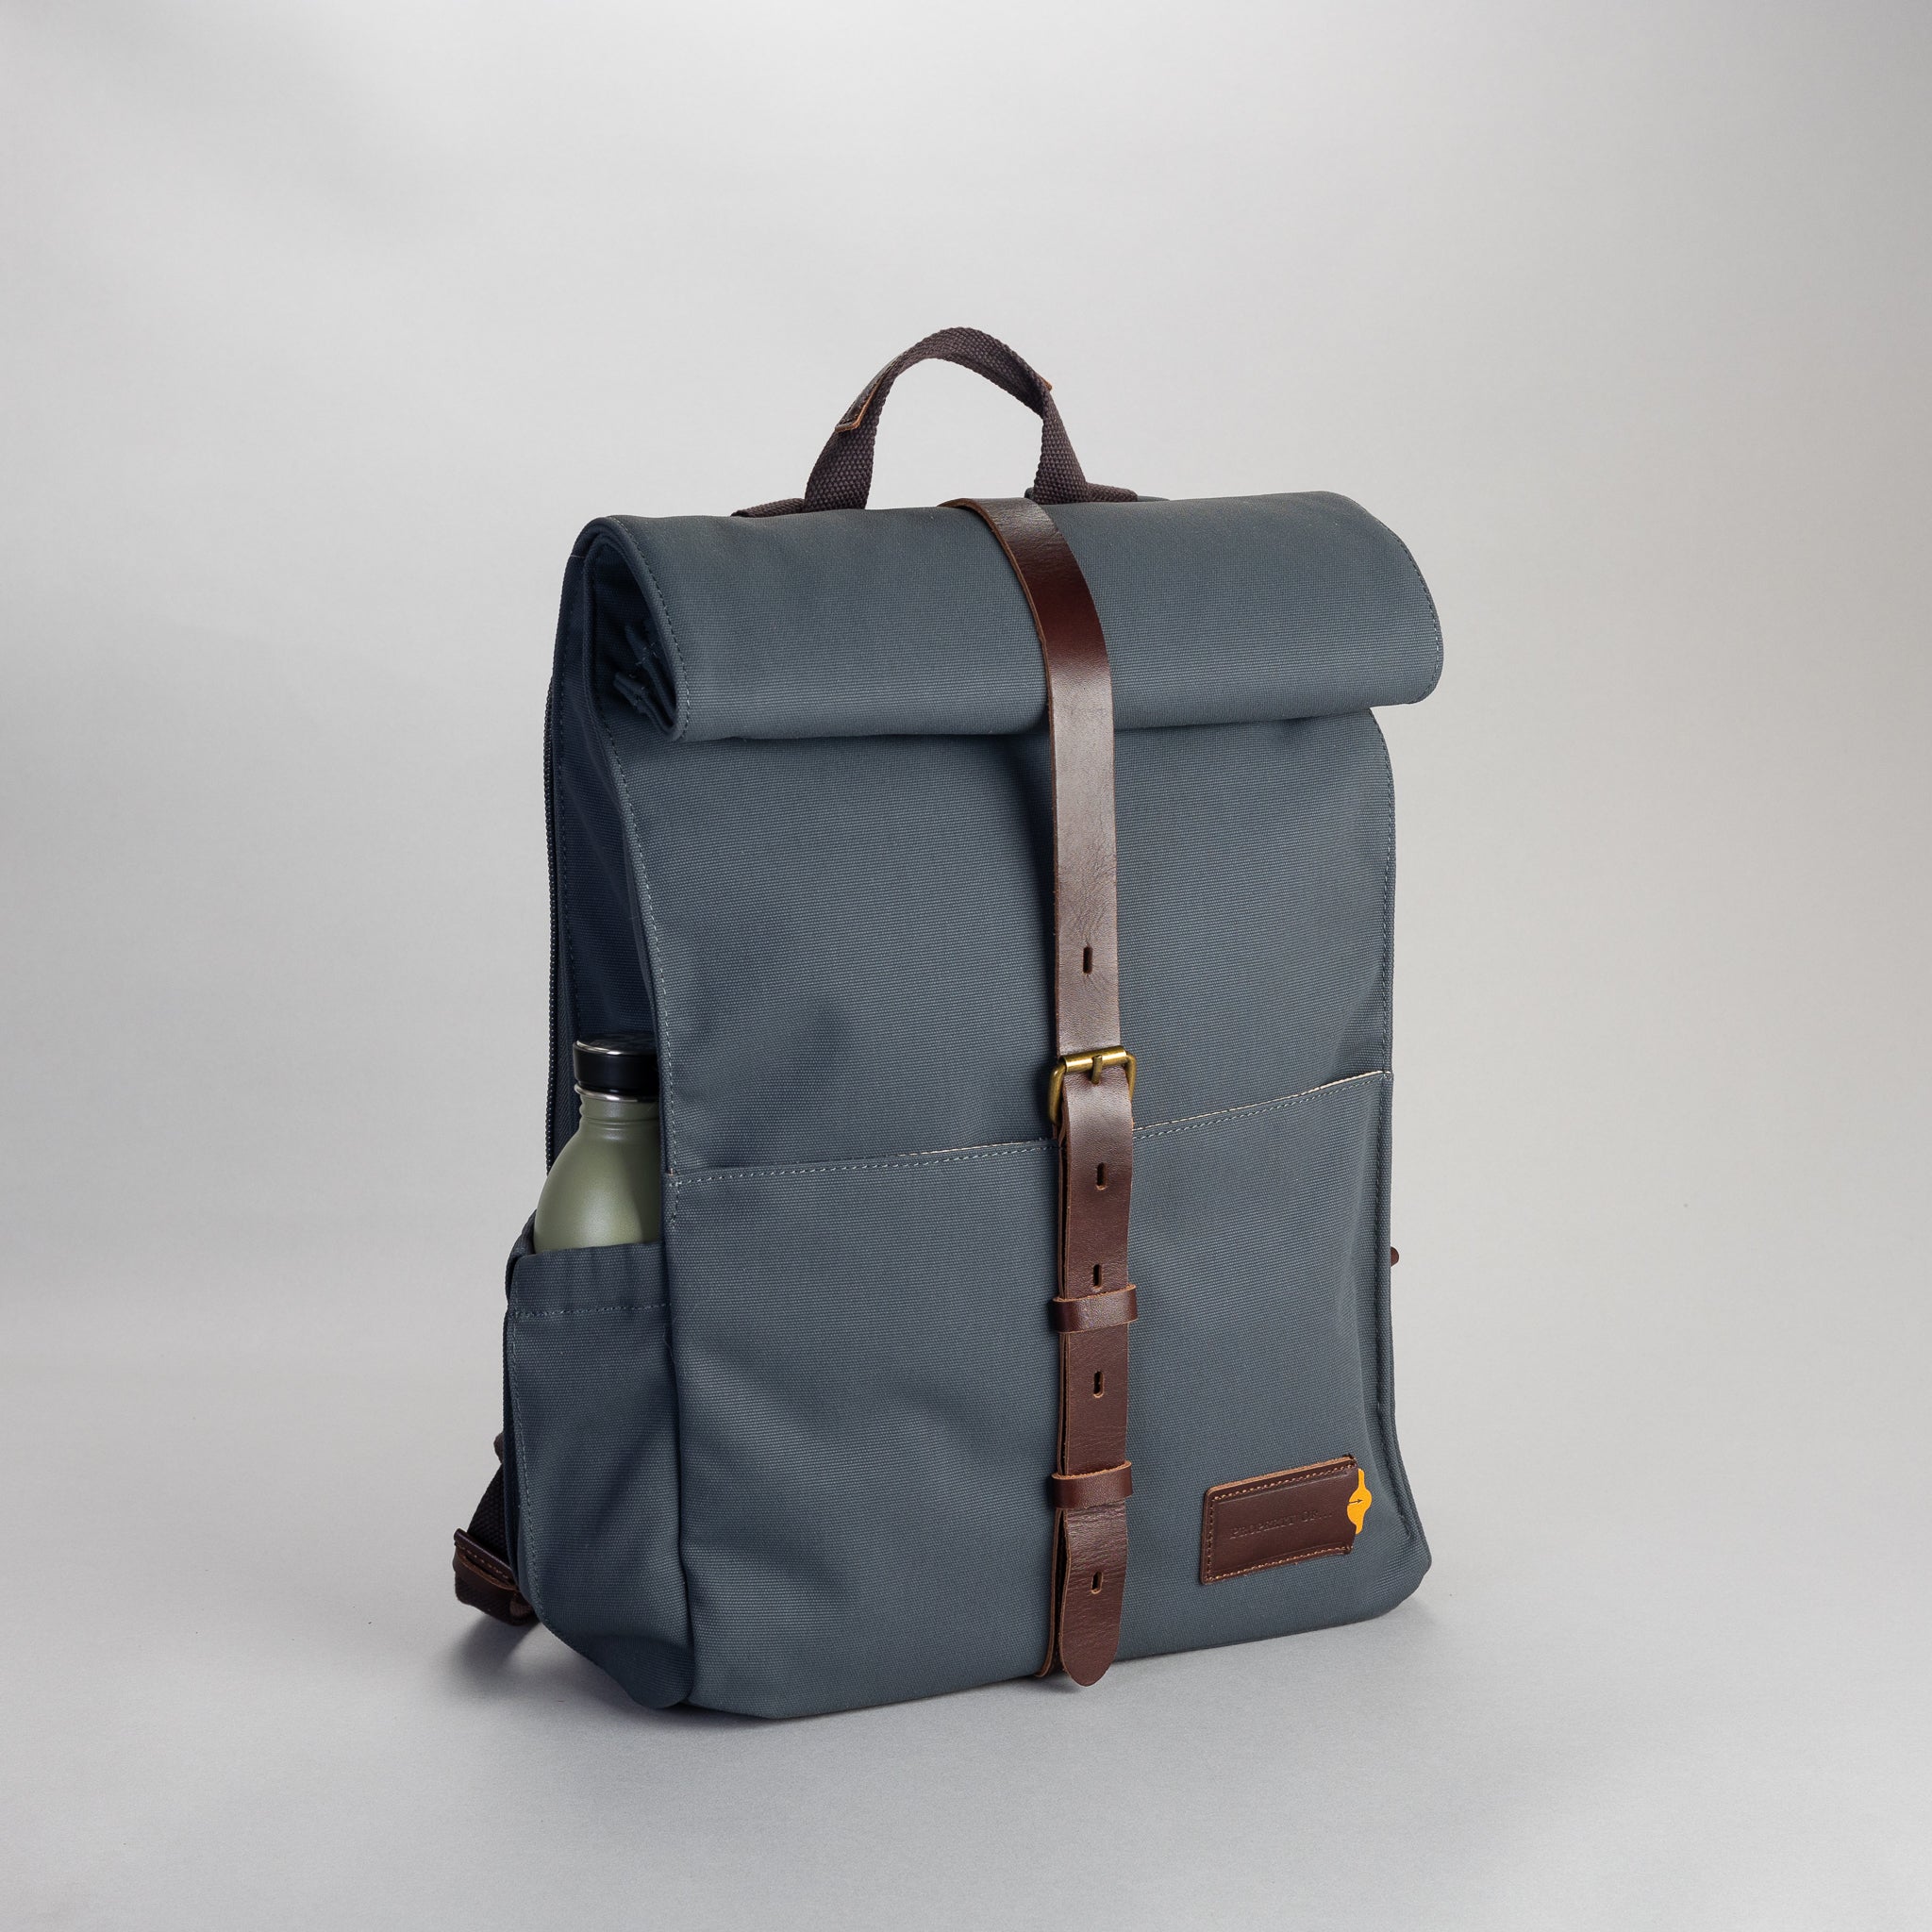 Travel gear for the global citizen. Bags made from recycled PET. – PROPERTY  OF